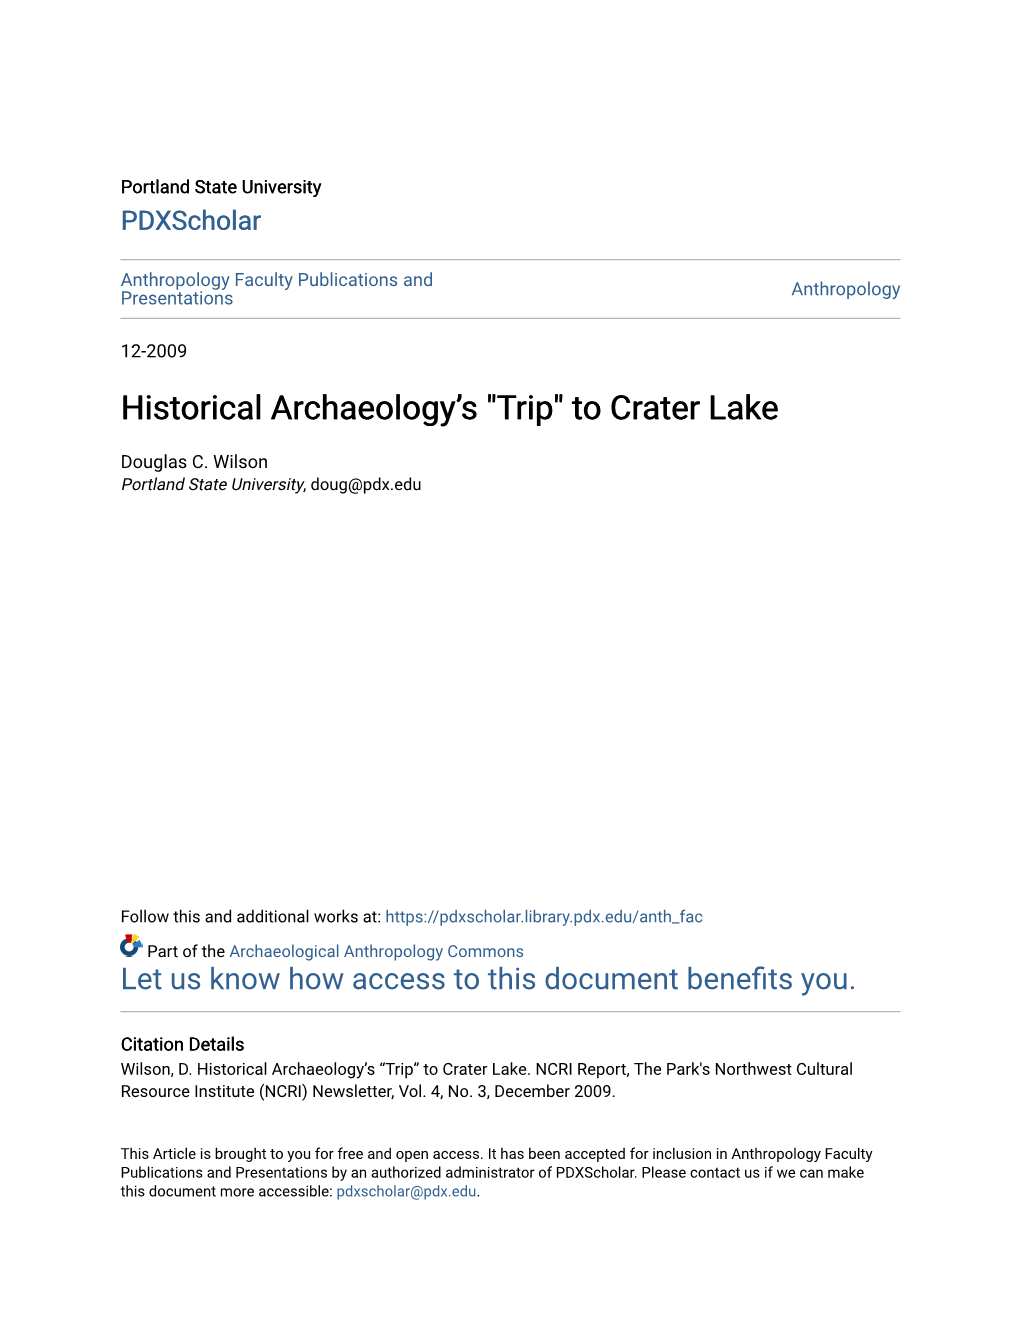 Historical Archaeology's "Trip" to Crater Lake